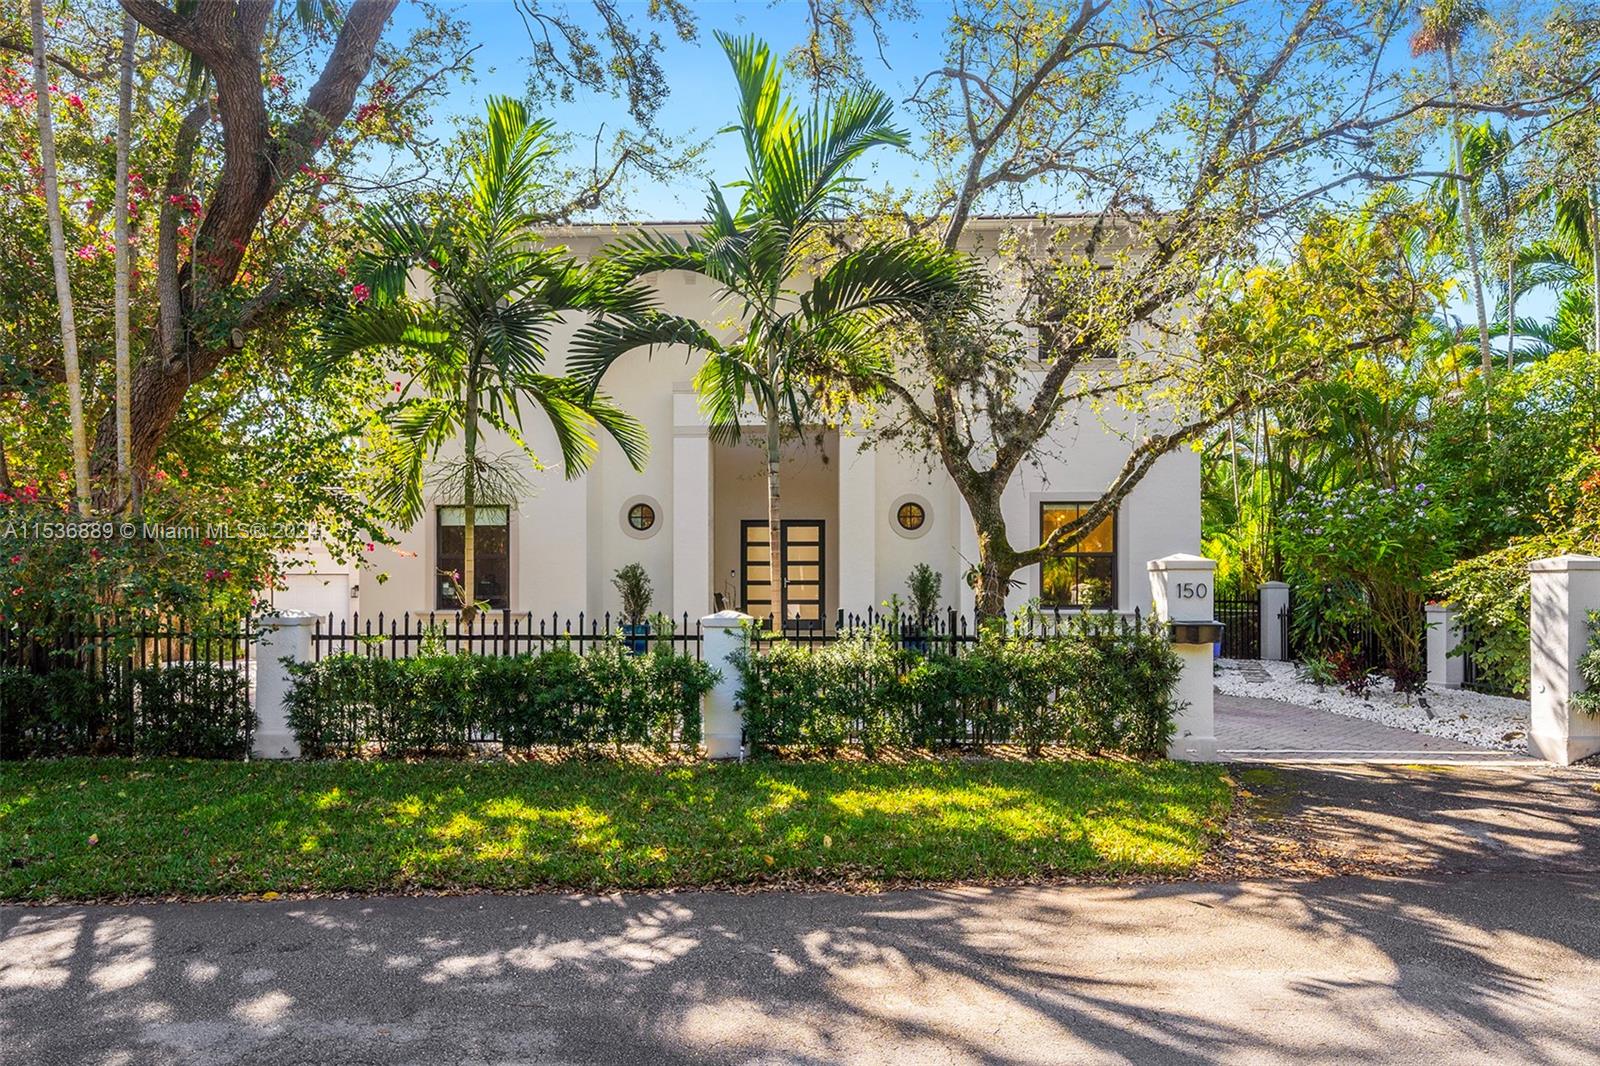 Property for Sale at 150 W Sunrise Ave, Coral Gables, Broward County, Florida - Bedrooms: 4 
Bathrooms: 5  - $4,169,000